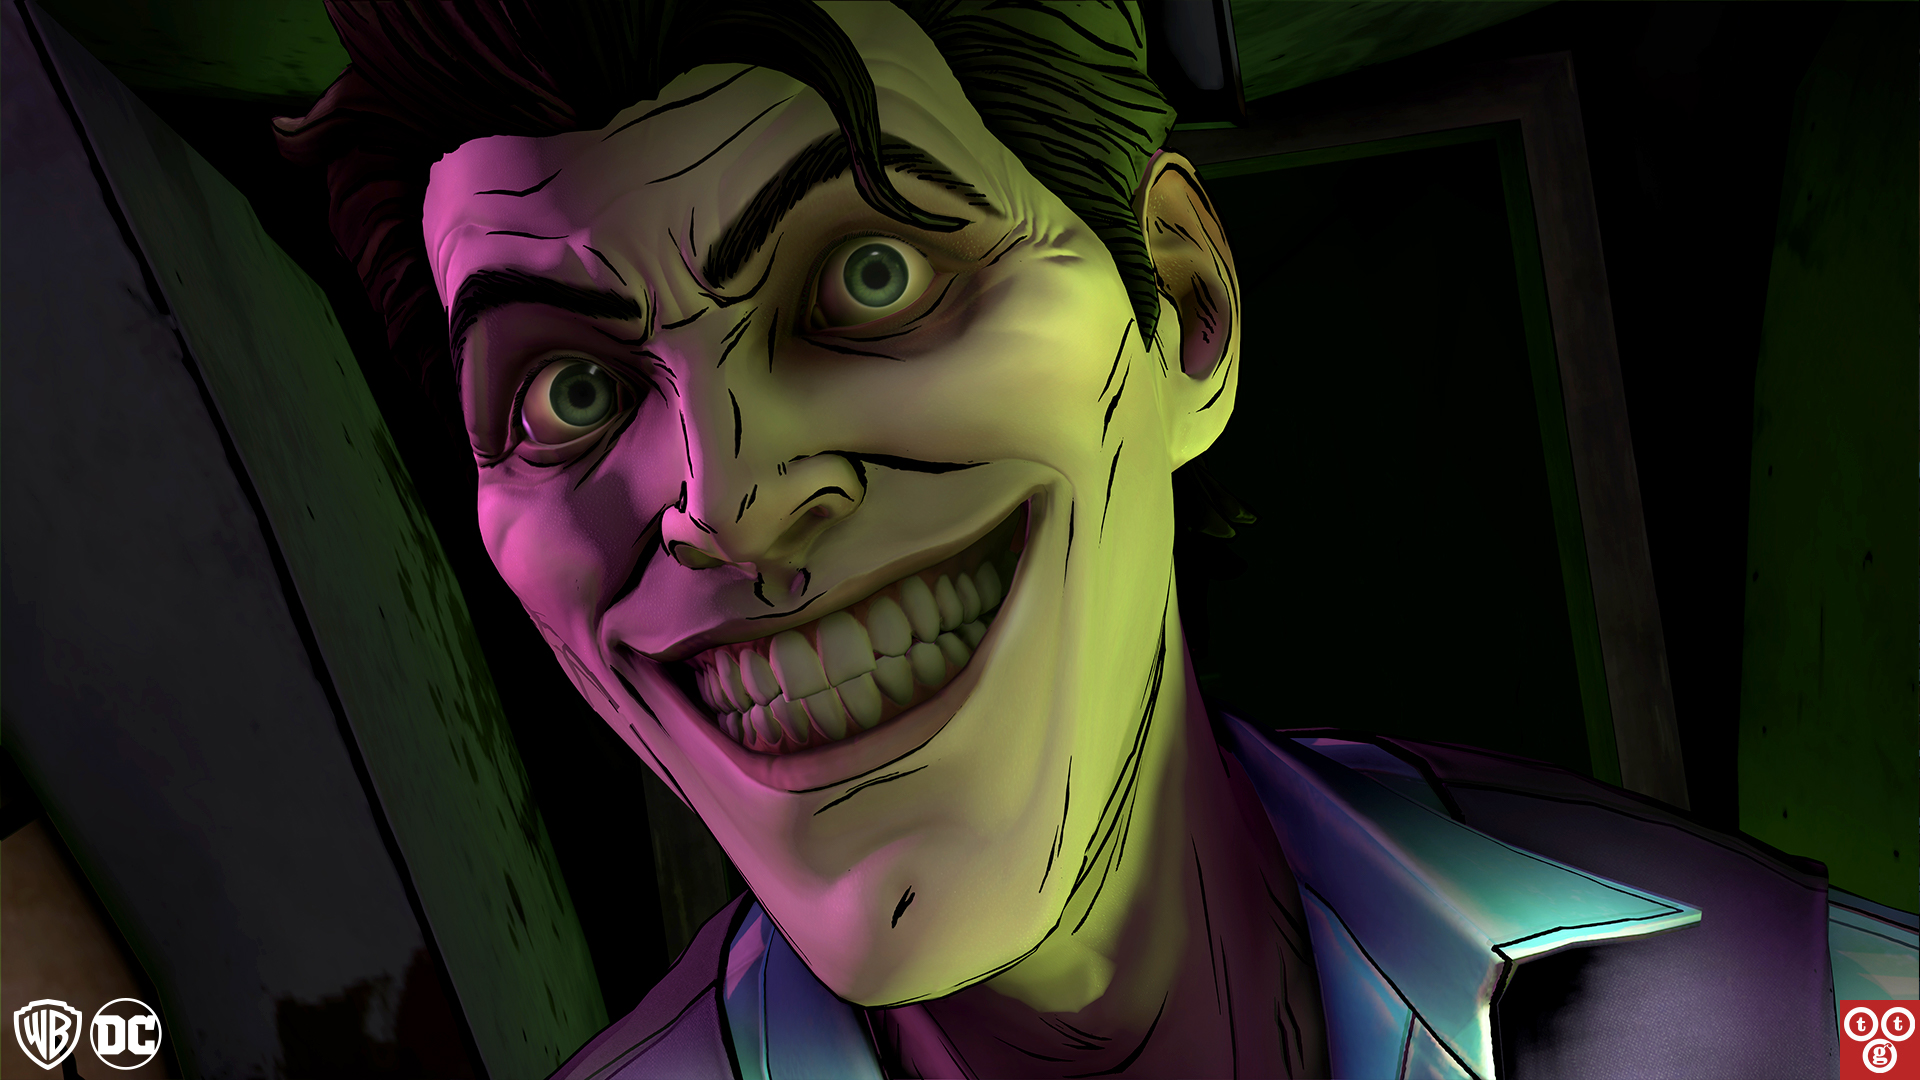 Save 50% on Batman: The Enemy Within - The Telltale Series on Steam